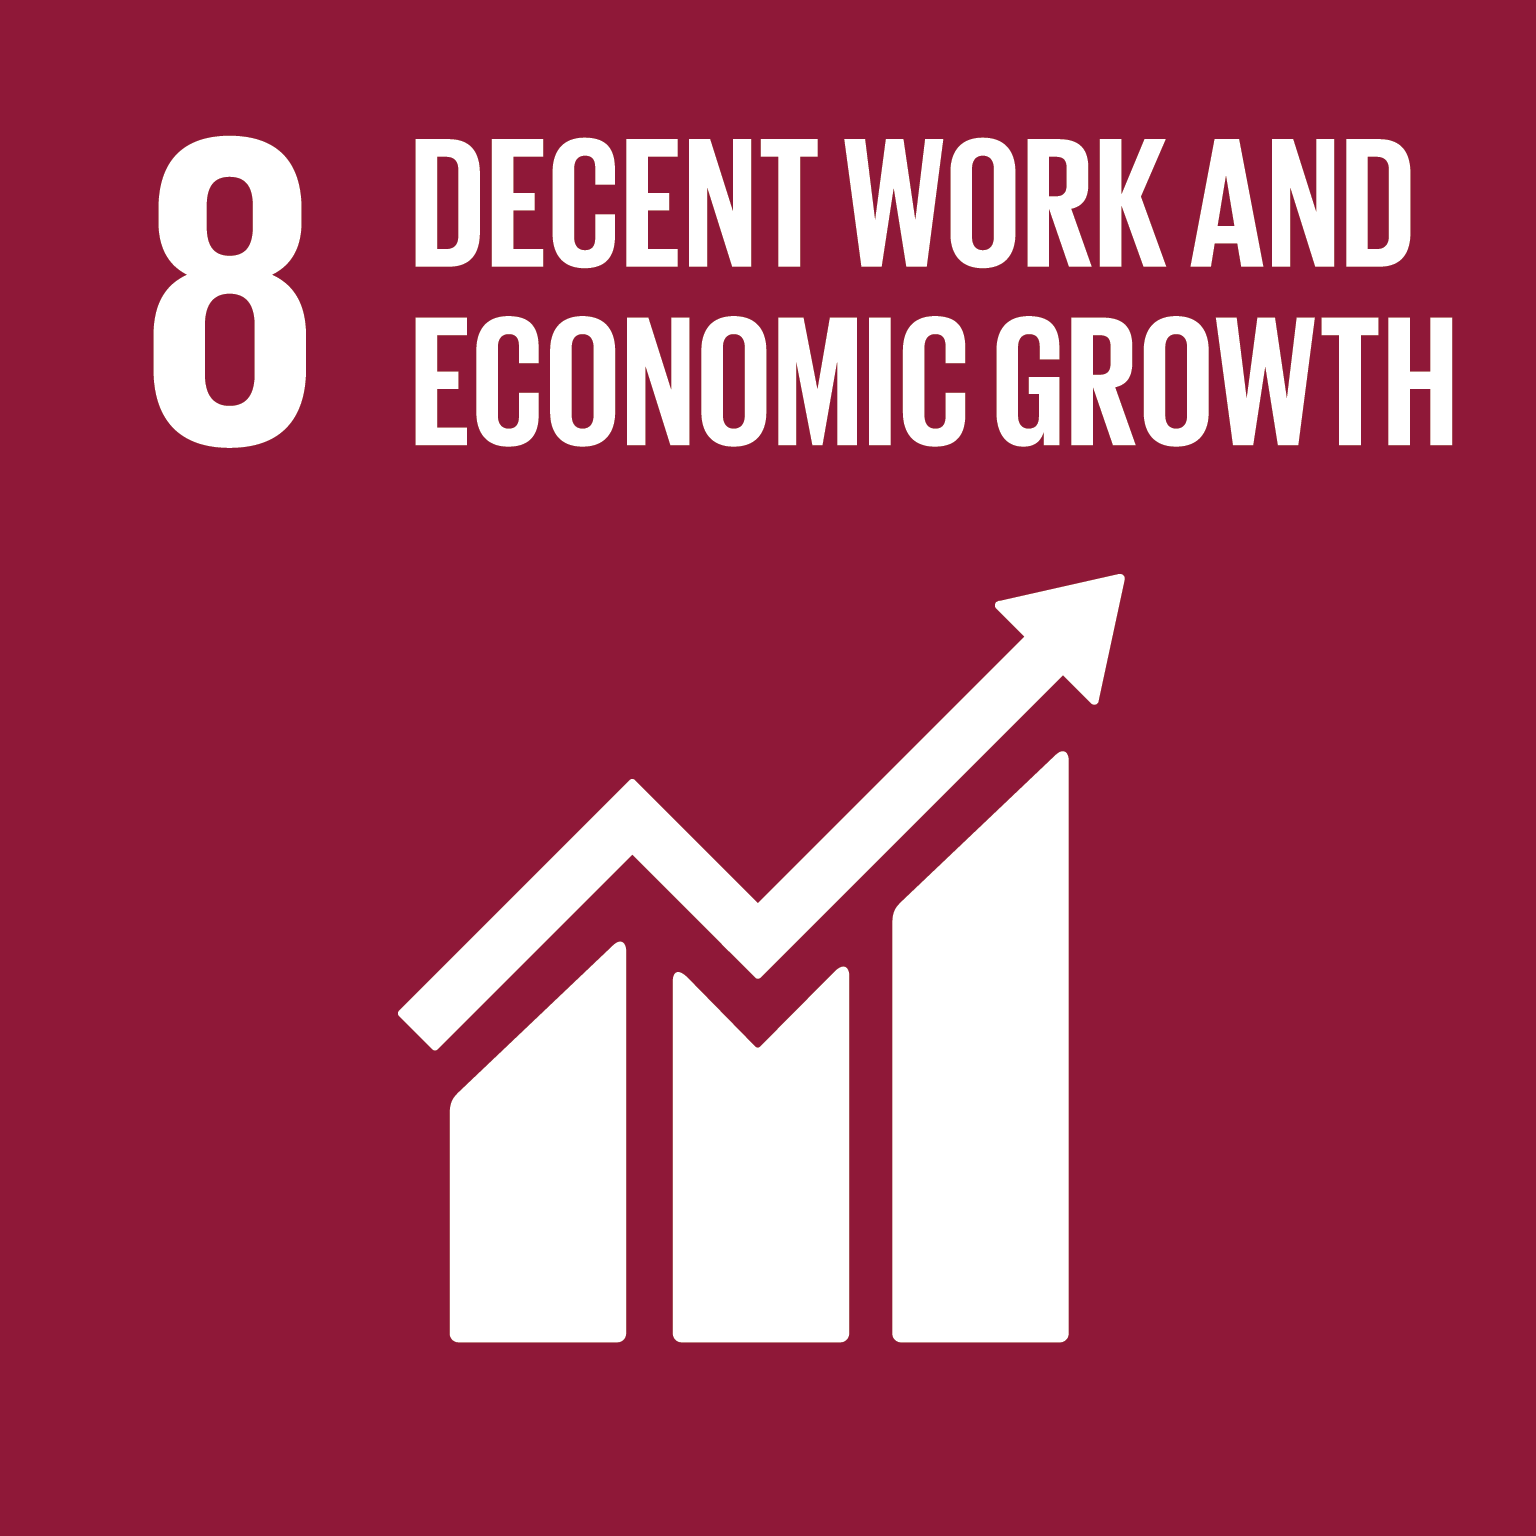 Goal 8: Decent Work, the text of this infographic is listed below